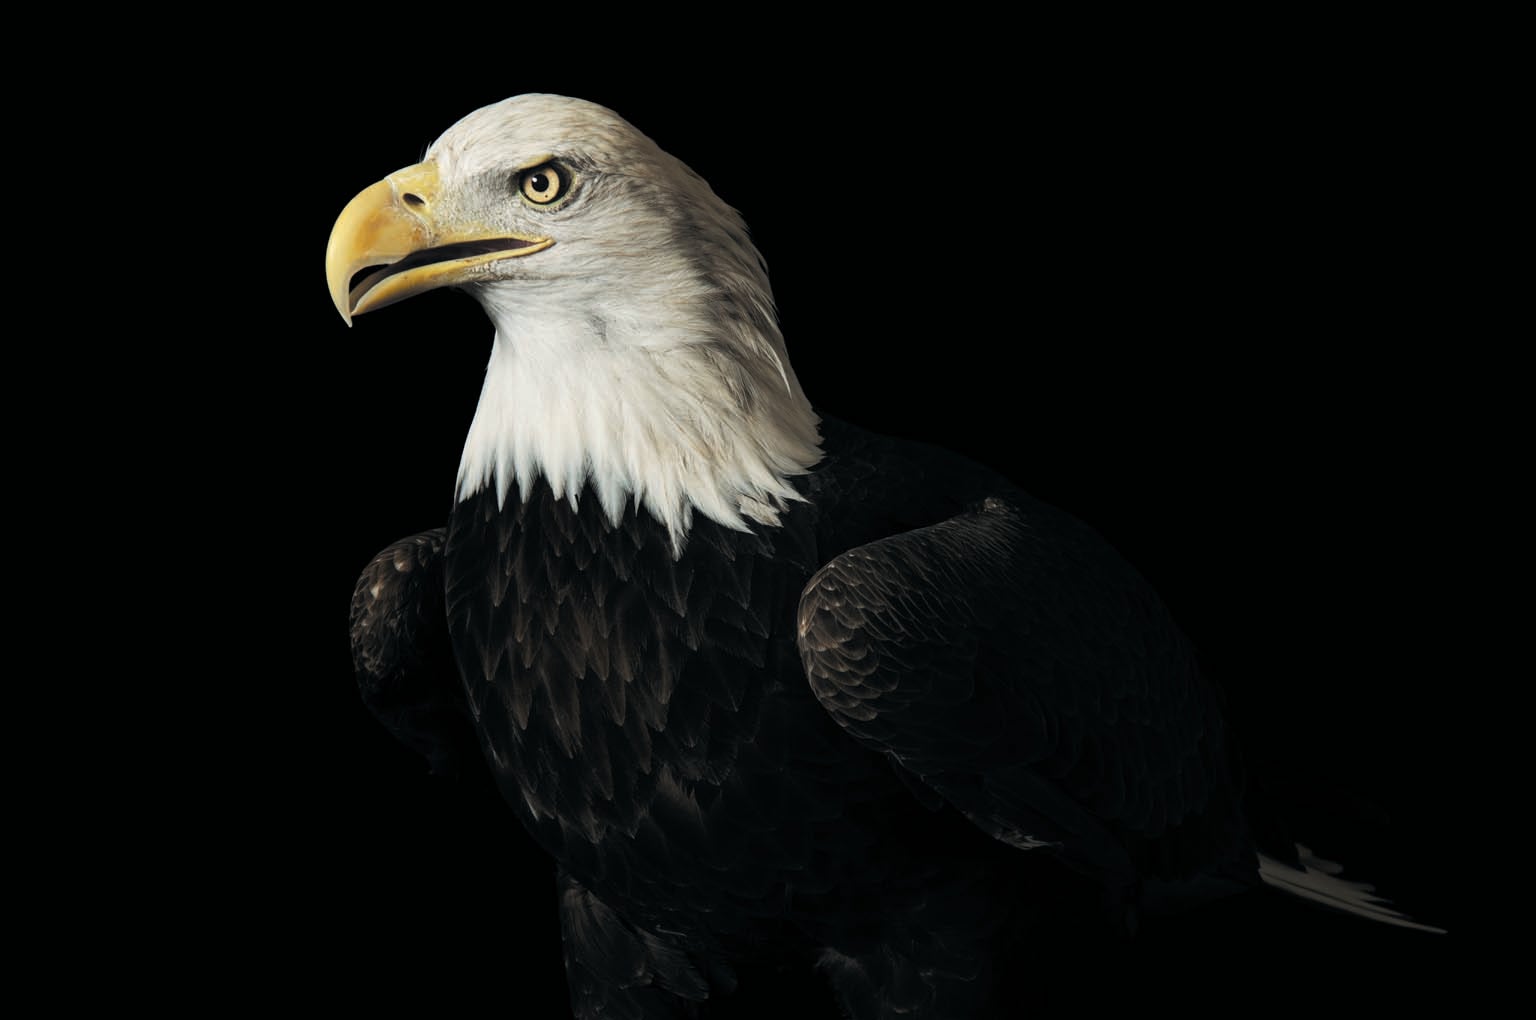 A bird with dark brown body, white head and yellow beak, described as a bald eagle, shown against a black background.